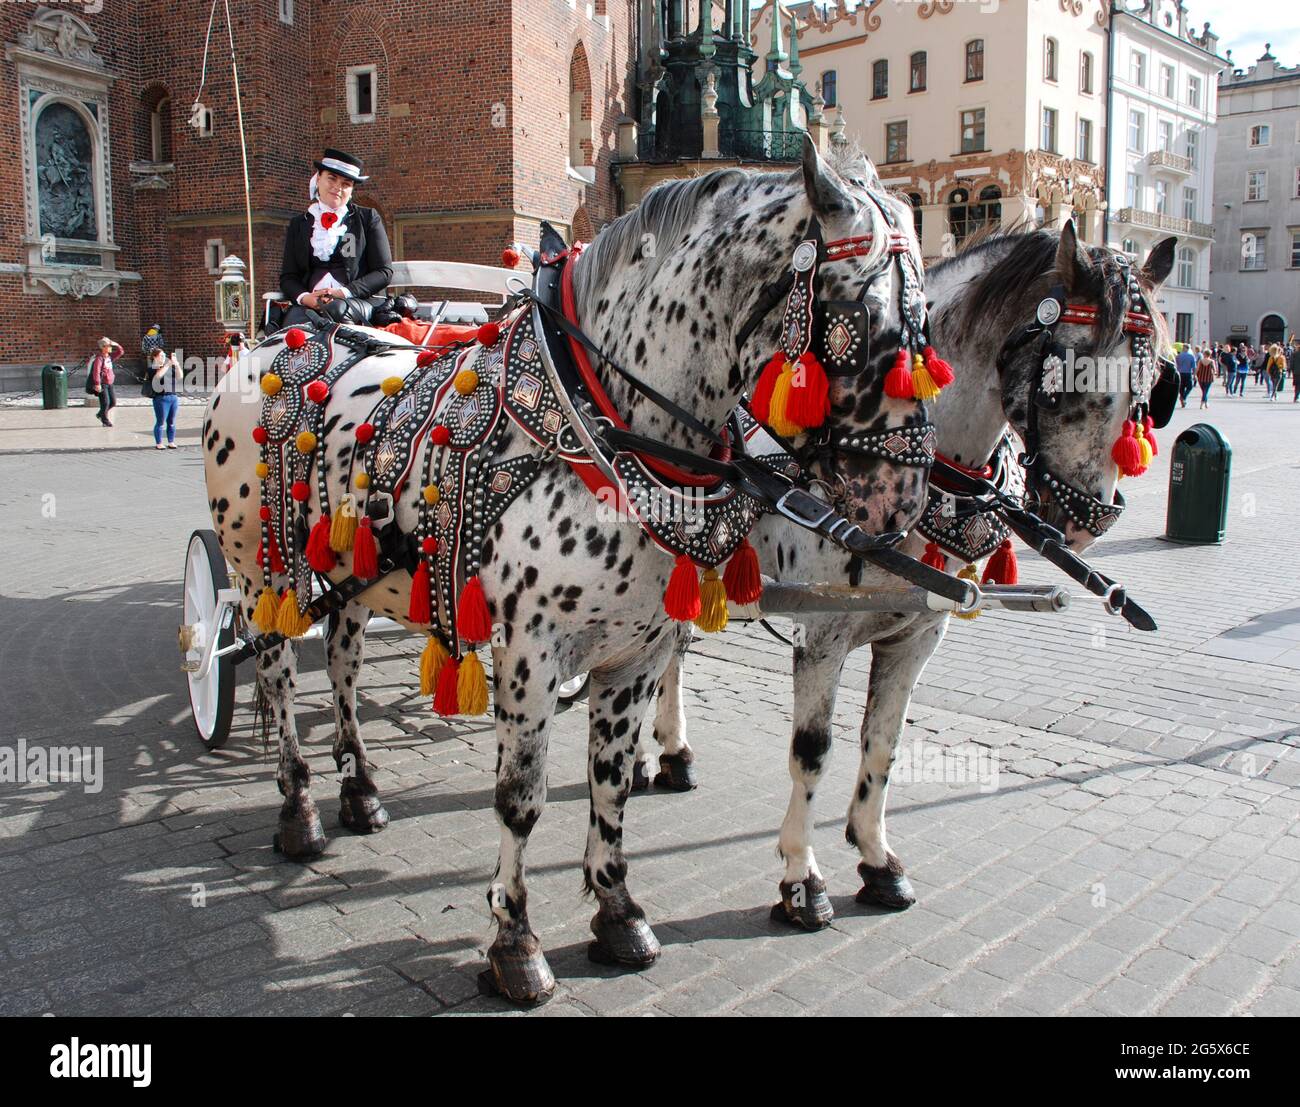 Decorated horses and carriage waiting for tourist passengers for tour of Krakow sights, Poland Stock Photo